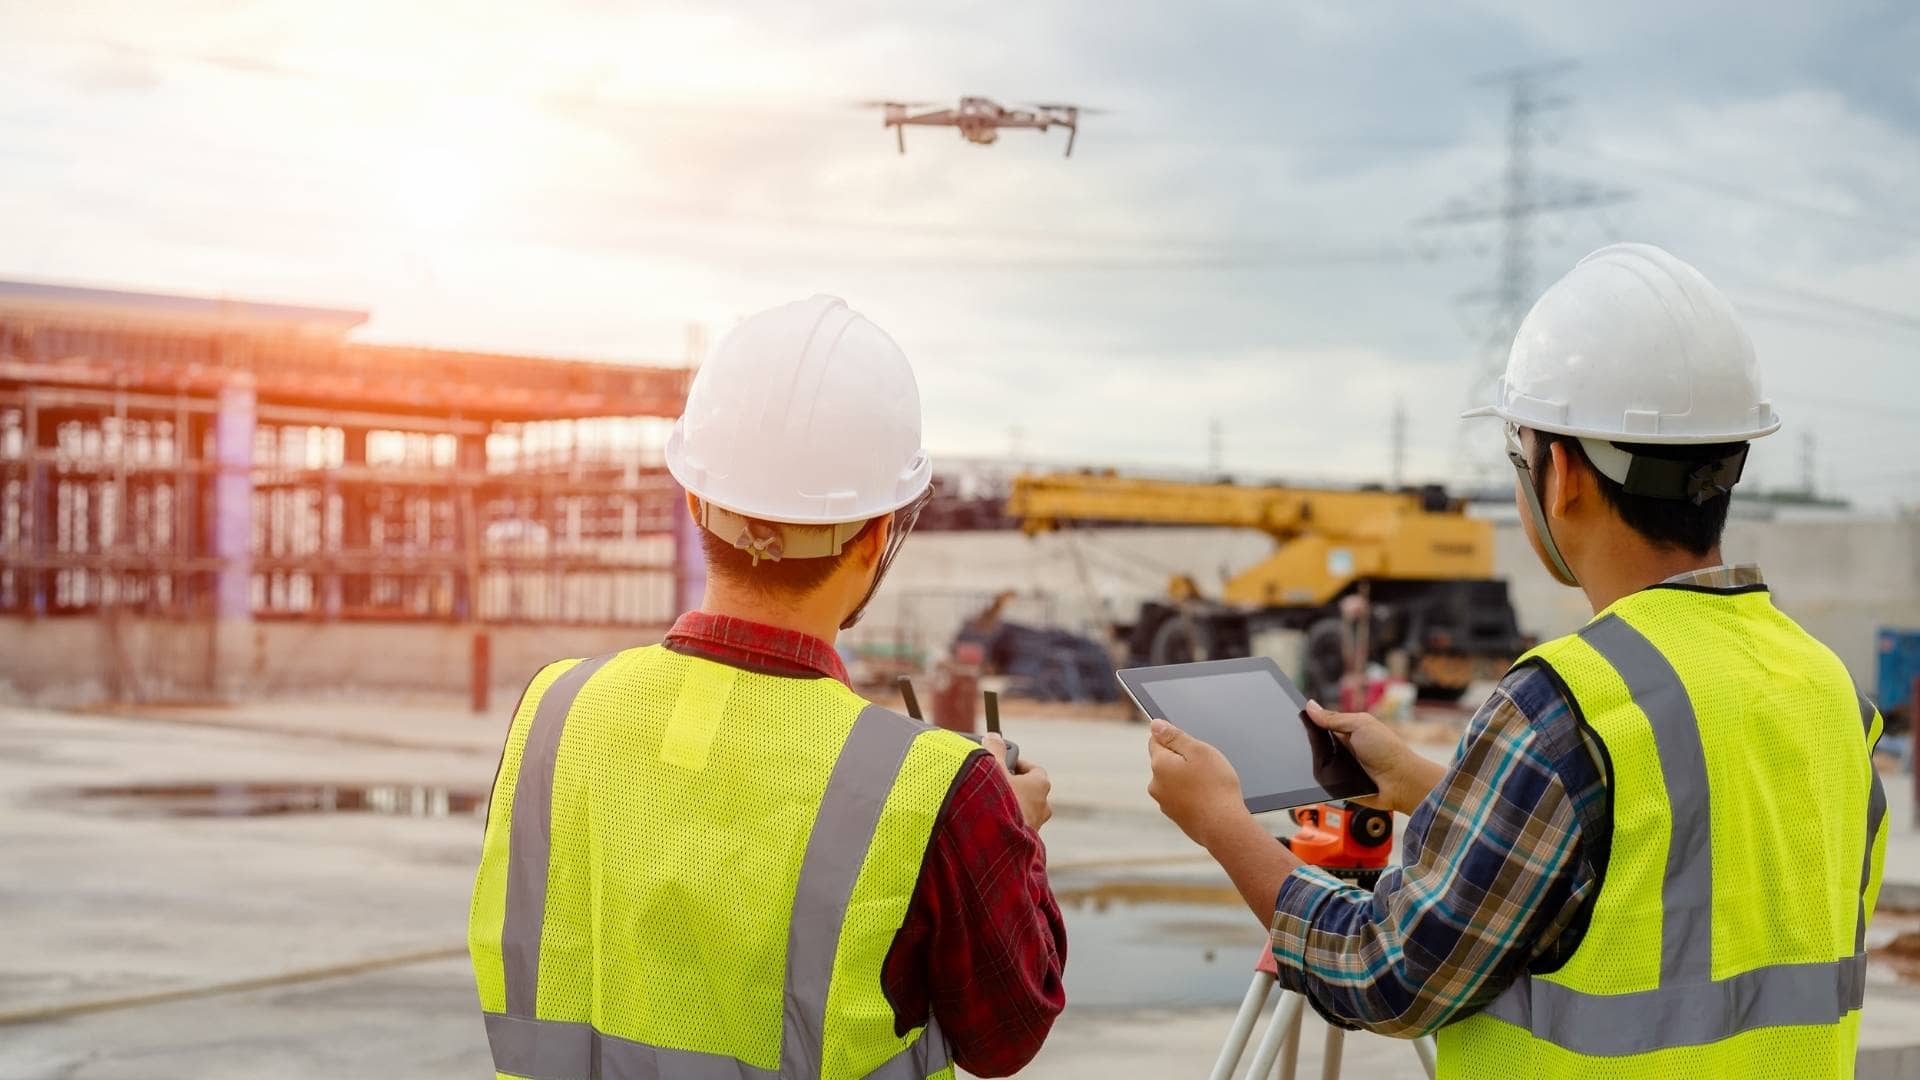 The future of construction: drones, exoskeletons and digitization